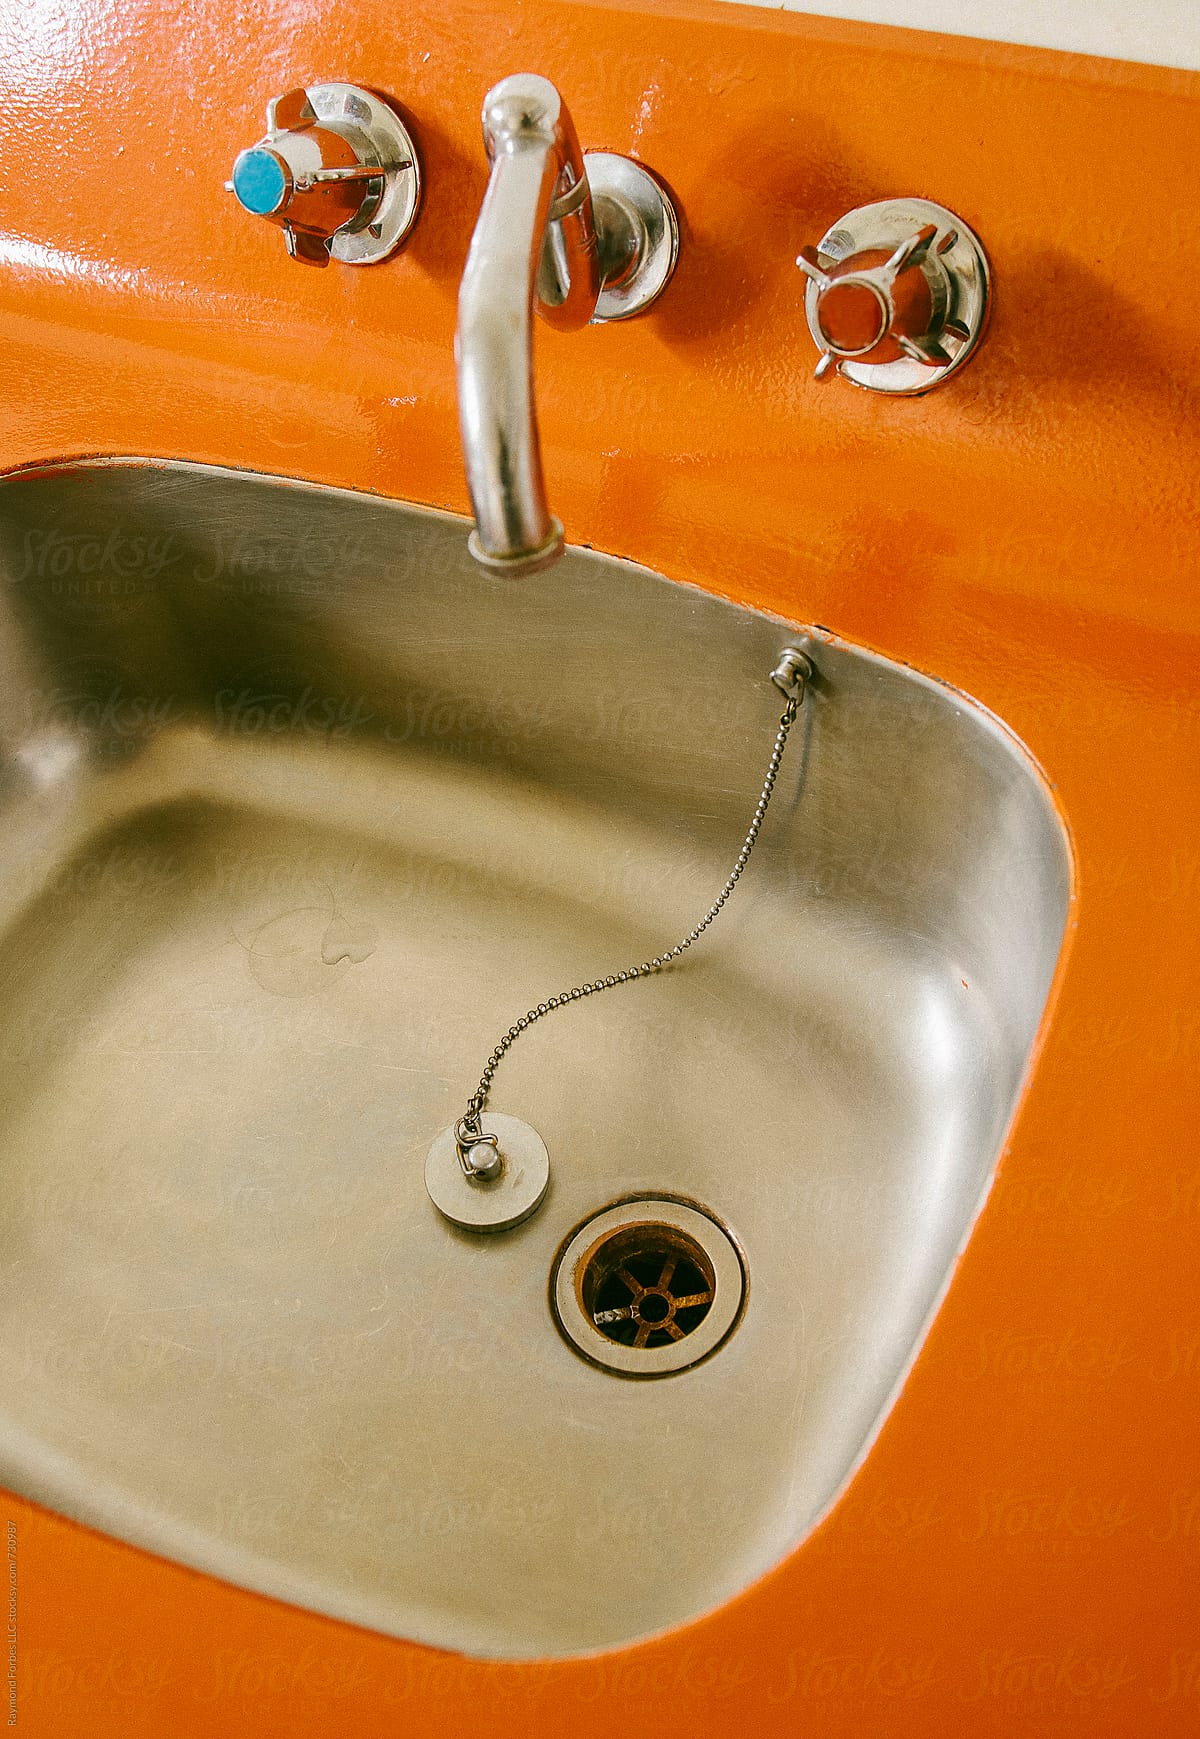 Kitchen Sink Drain with stopper and color orange